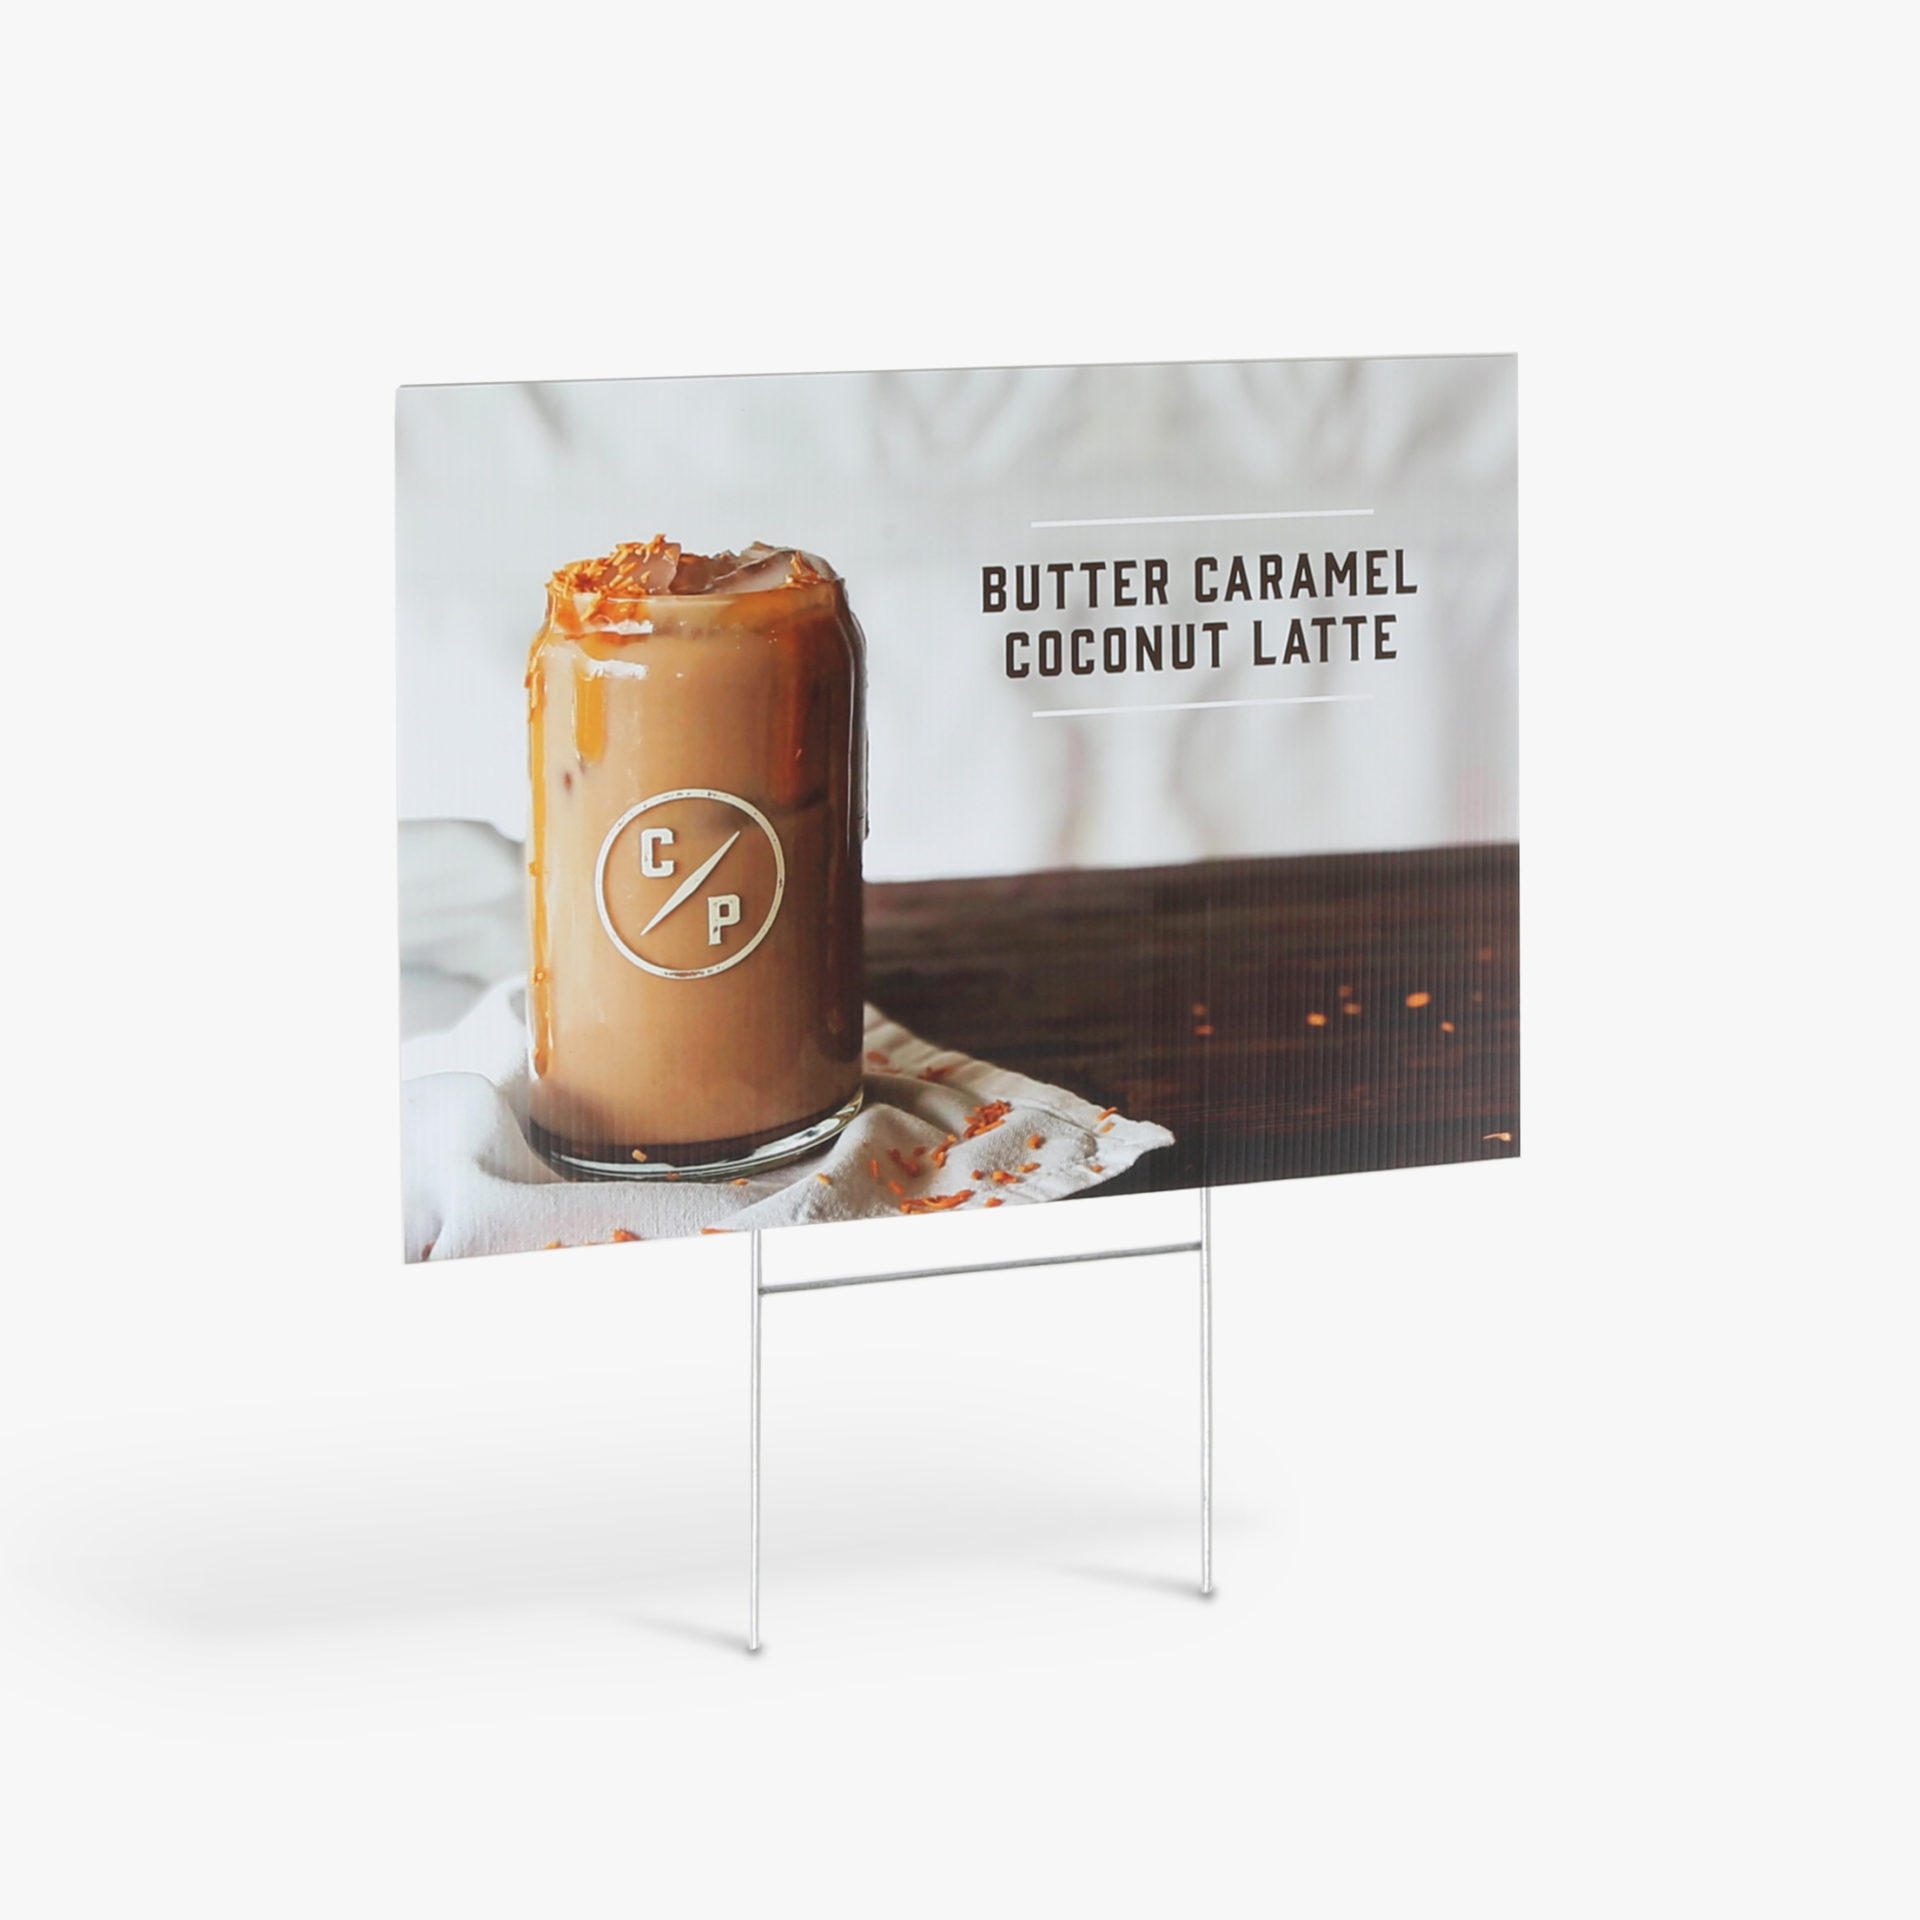 A custom lawn sign printed with Butter Caramel Coconut Latte in brown next to an iced coffee.